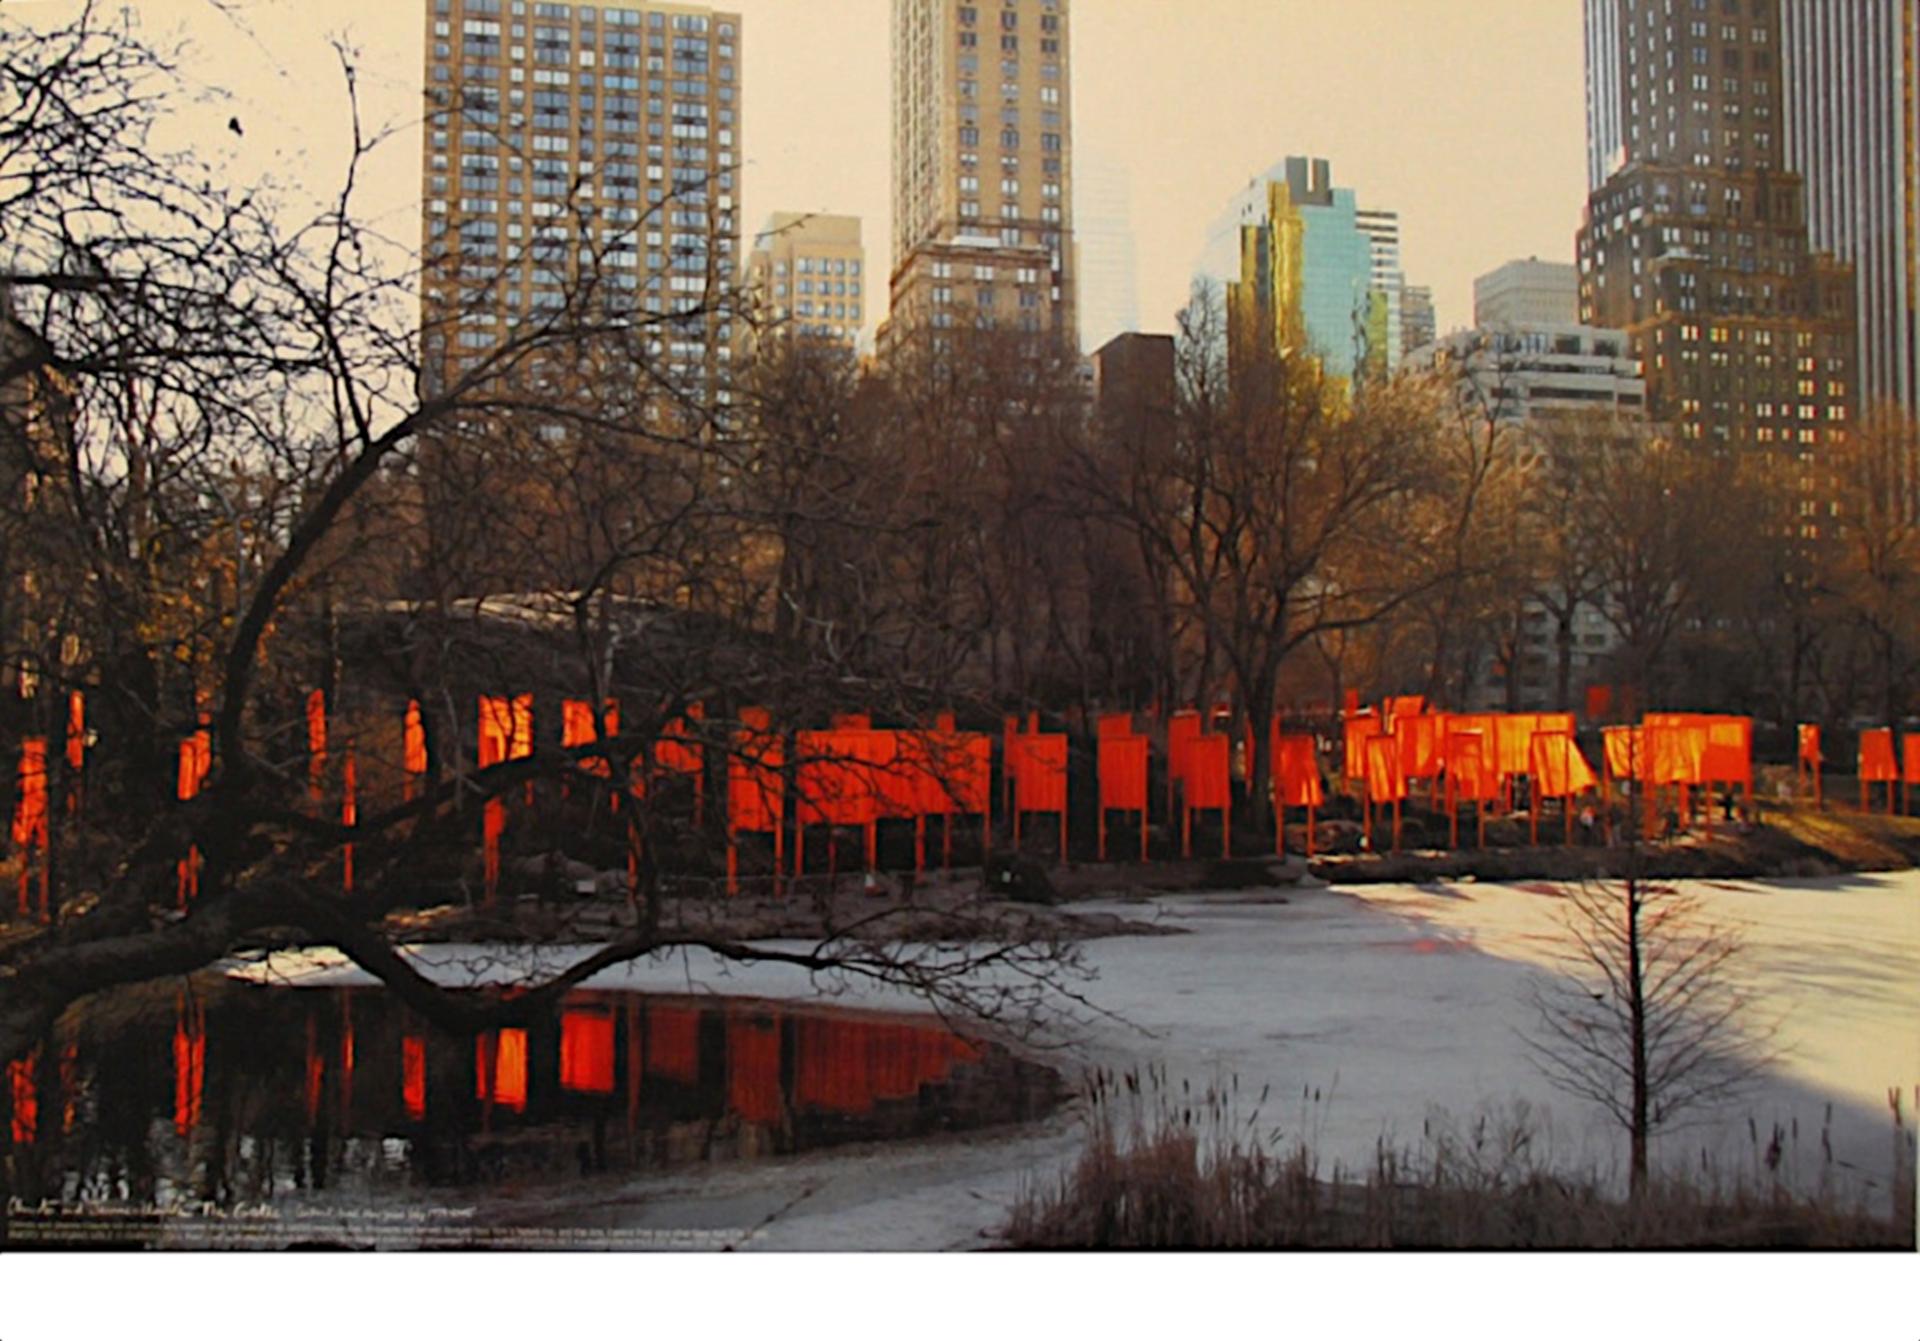 Christo - "The Gates - New York Central Park" - color offset on heavy paper